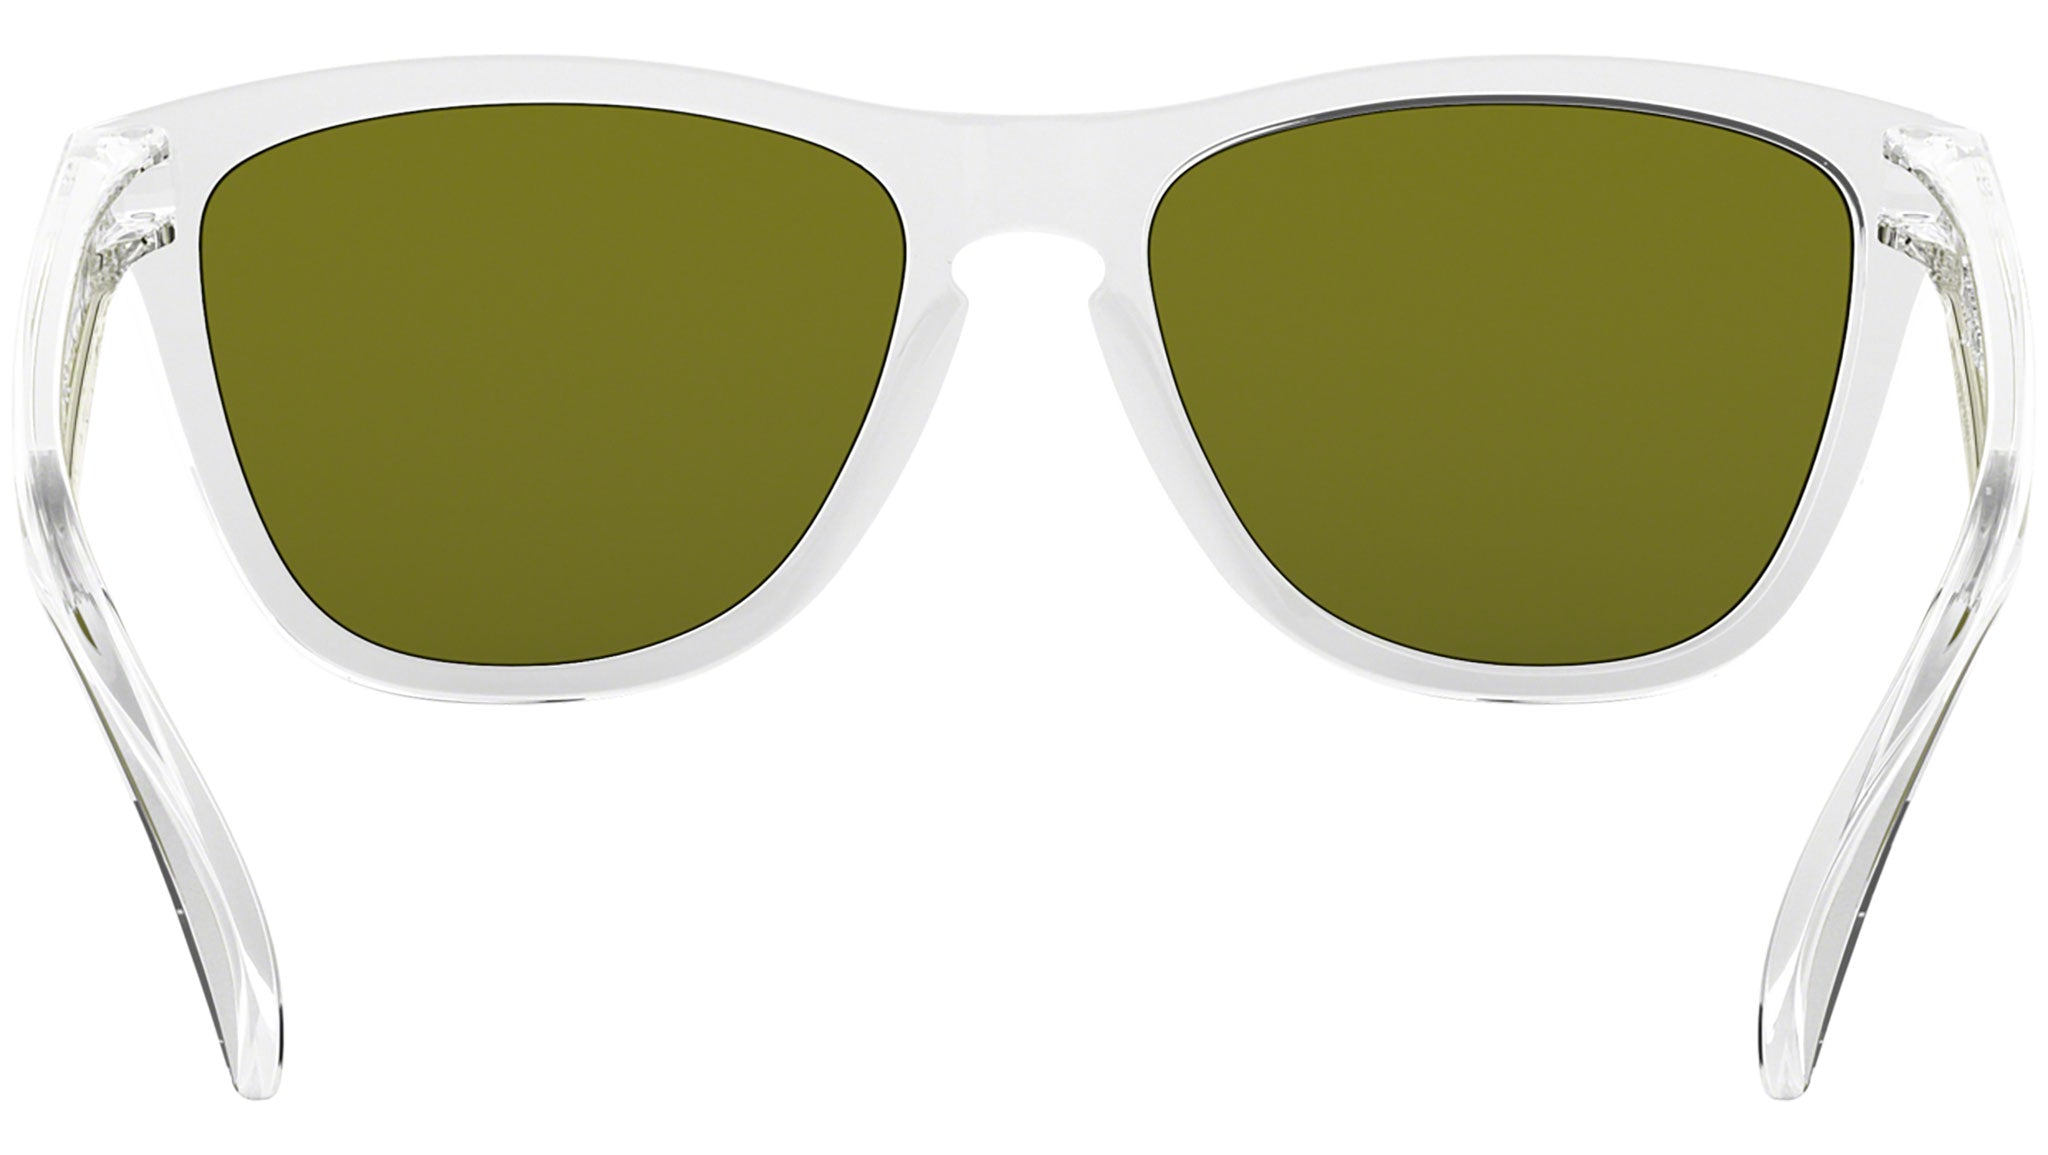 Frogskins OO9013 05 polished clear